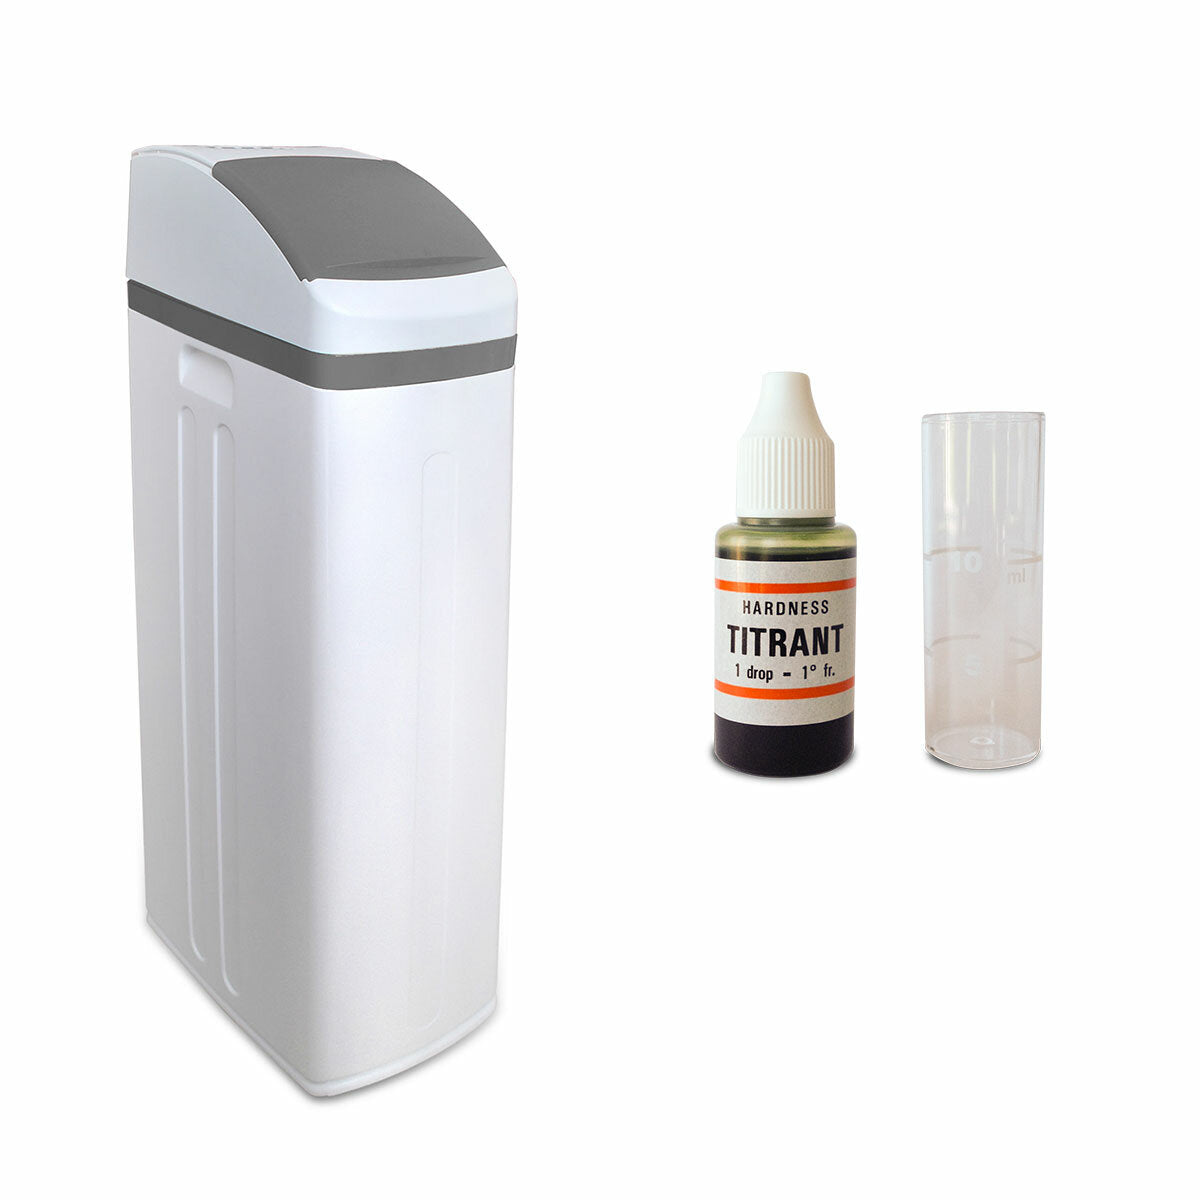 Gel Easy Soft 21 water softener with ion exchange